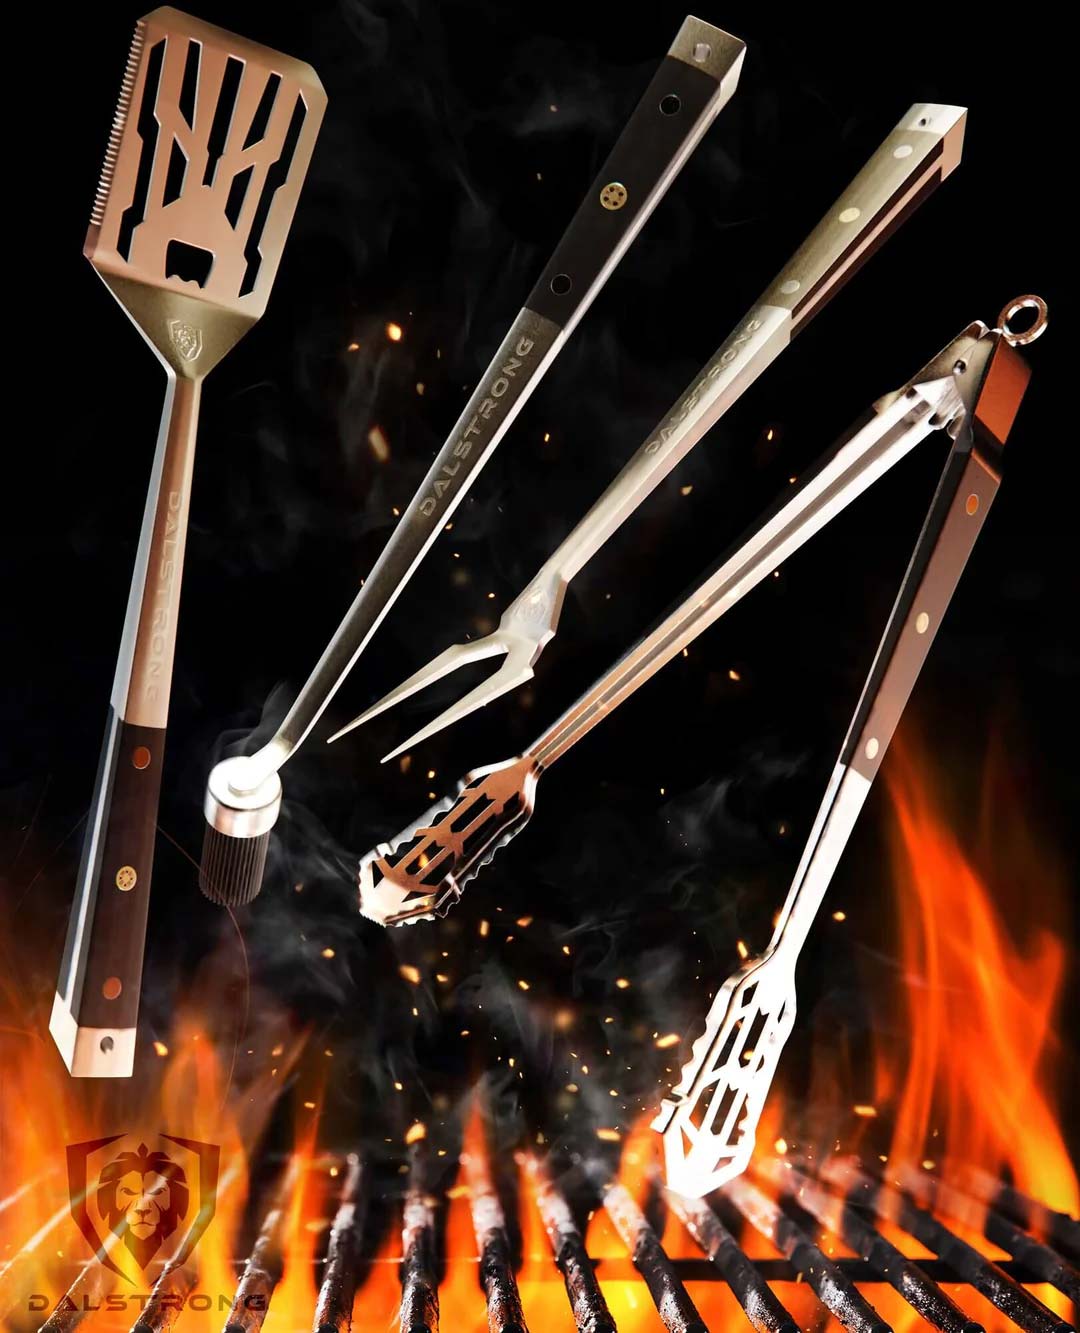 Premium Grilling Gift Set with Spatula, Tongs & BBQ Fork